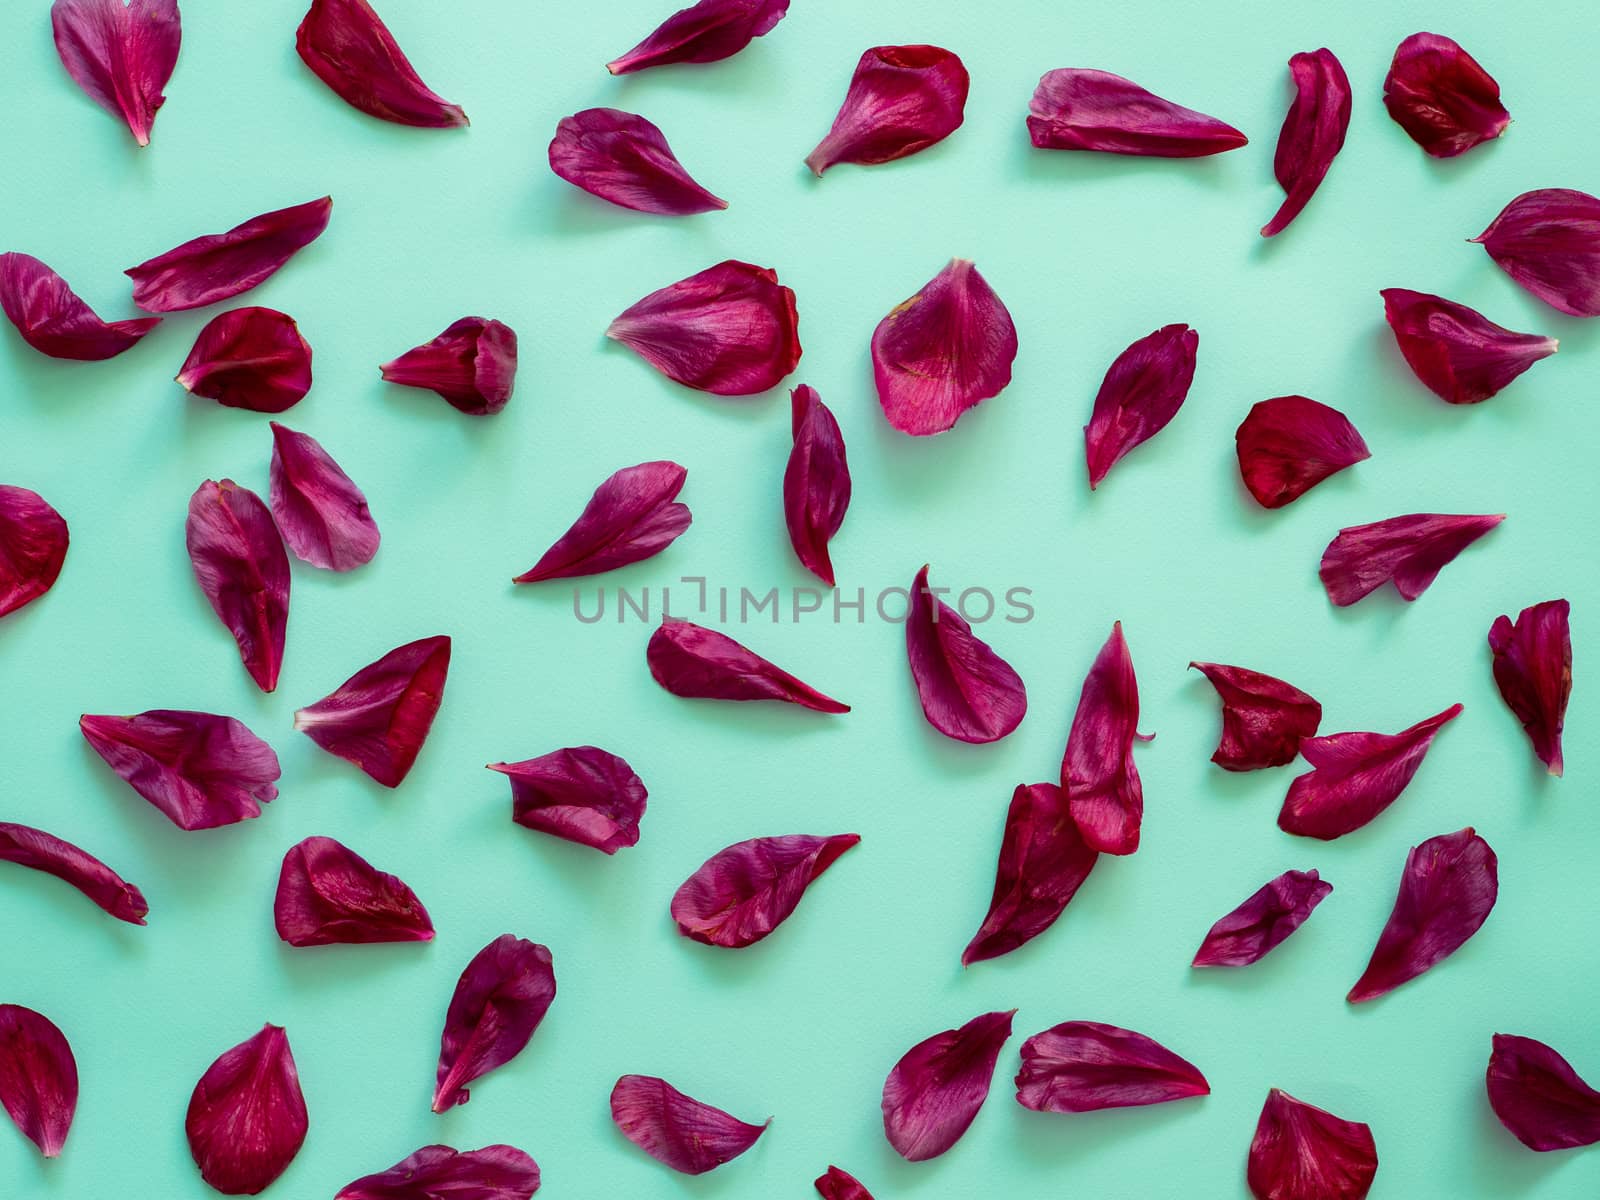 Red burgundy peony petals flat lay on blue-green turquoise background. Flower petals for minimal holiday concept. Creative layout made of flowers leaves. Flat lay pattern.